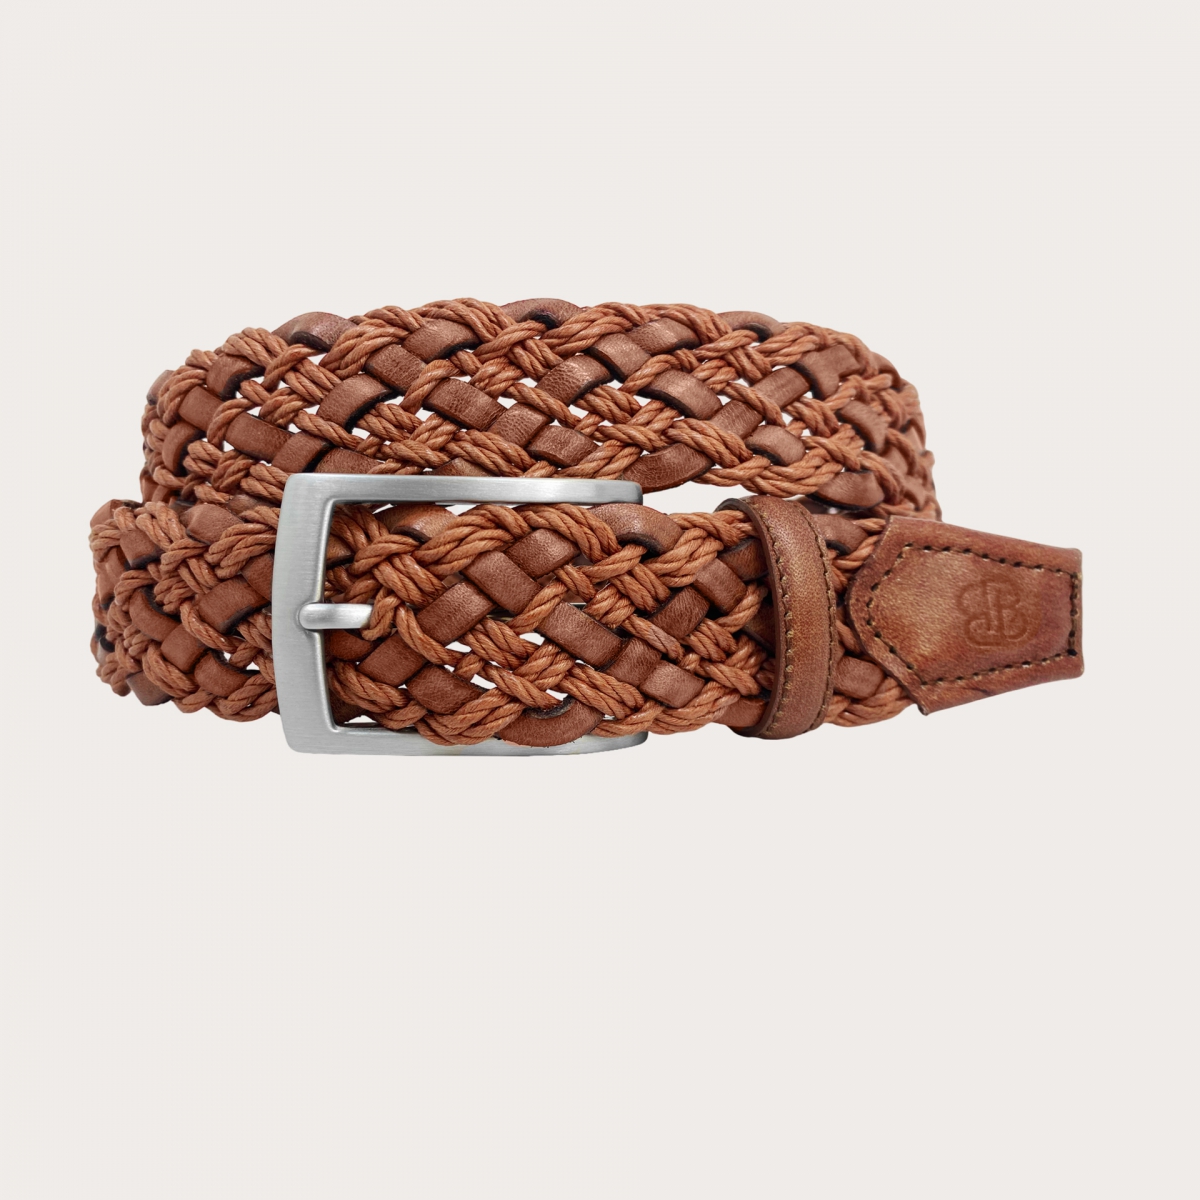 BRUCLE Woven Leather Belt